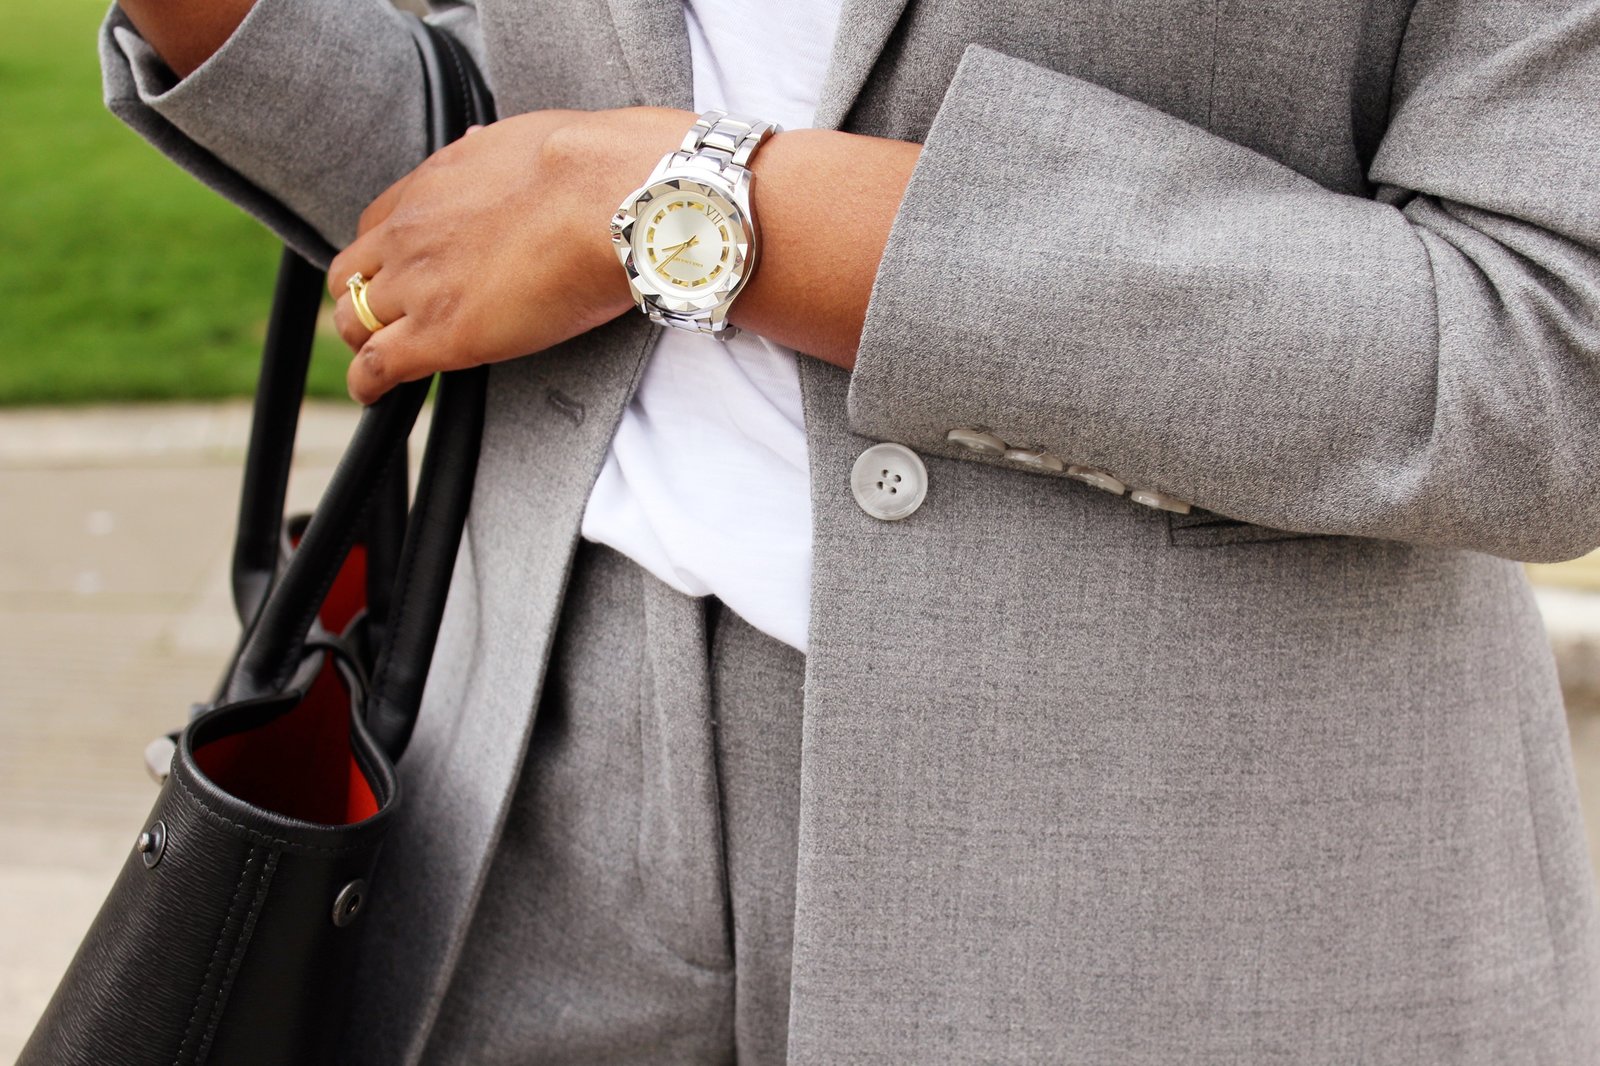 Close of Sachini wearing a grey suite and watch